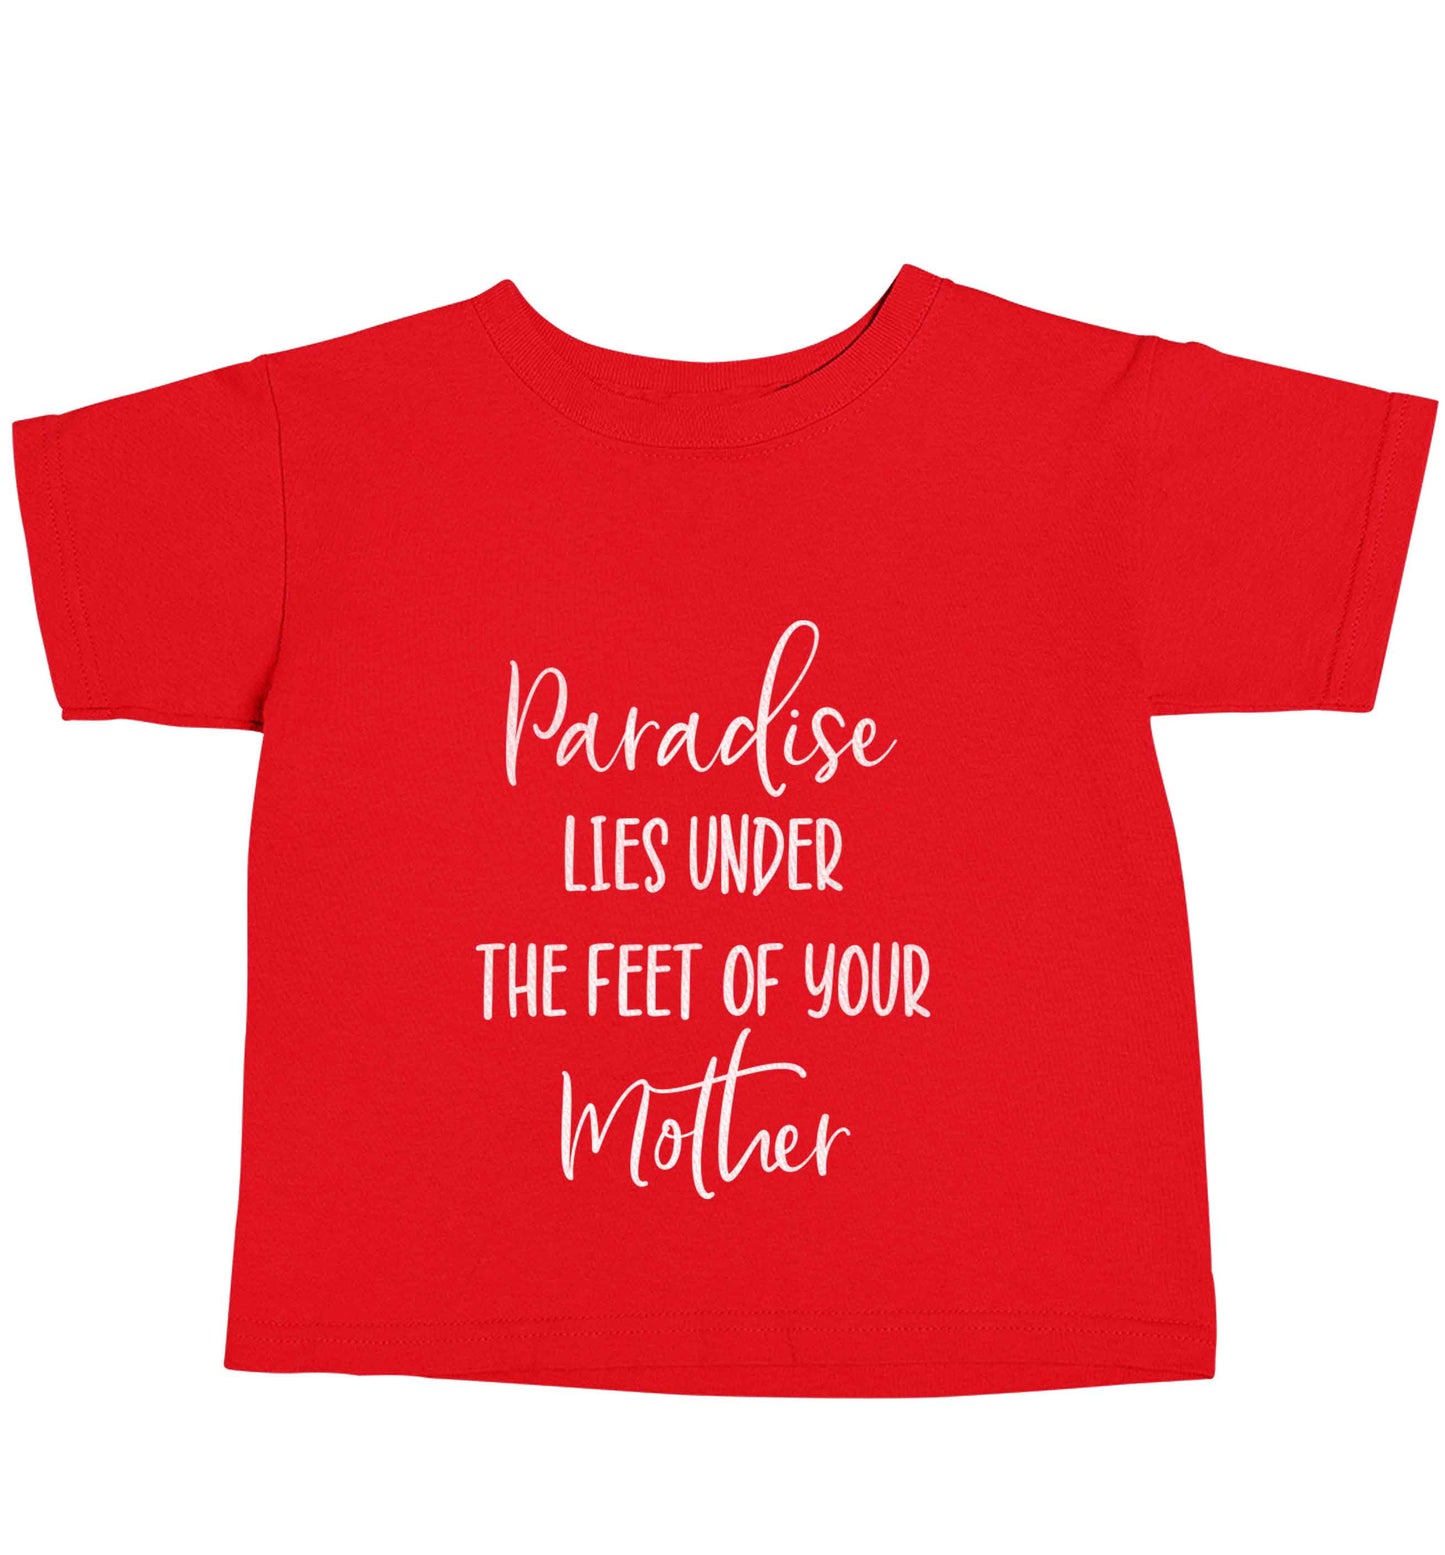 Paradise lies under the feet of your mother red baby toddler Tshirt 2 Years